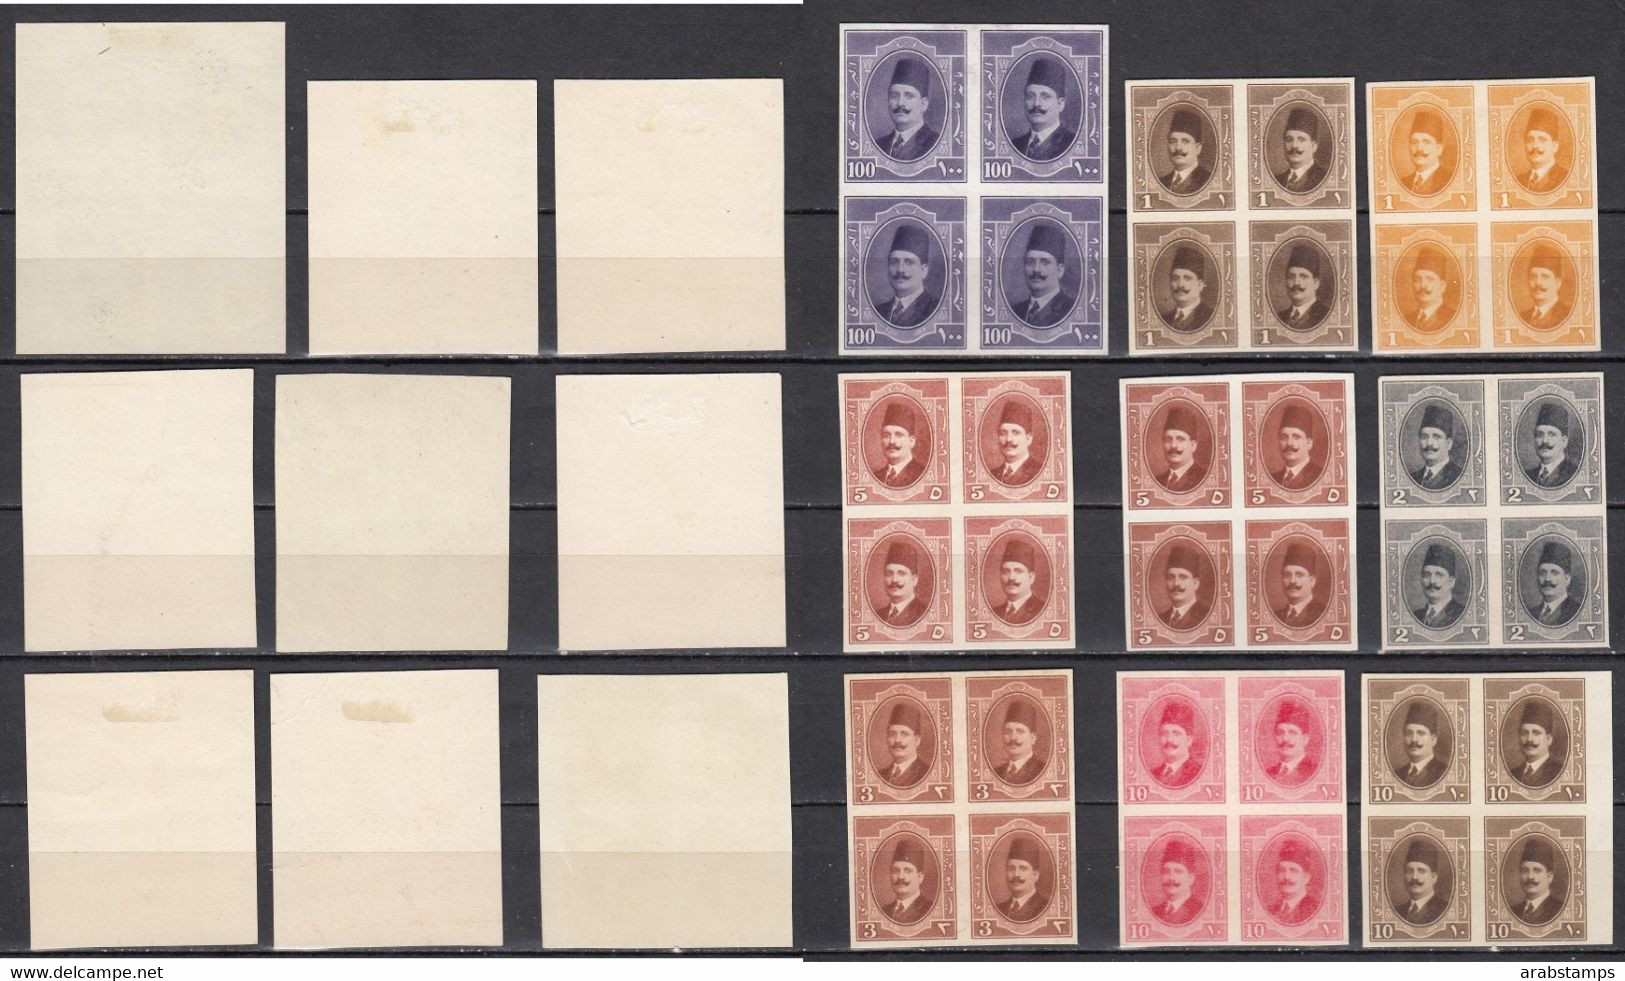 1923 Egypt King Fouad 9 Block Of 4 IMPERF Proofs All Different Colors All Un-watrmark Paper VERY RARE - Unused Stamps